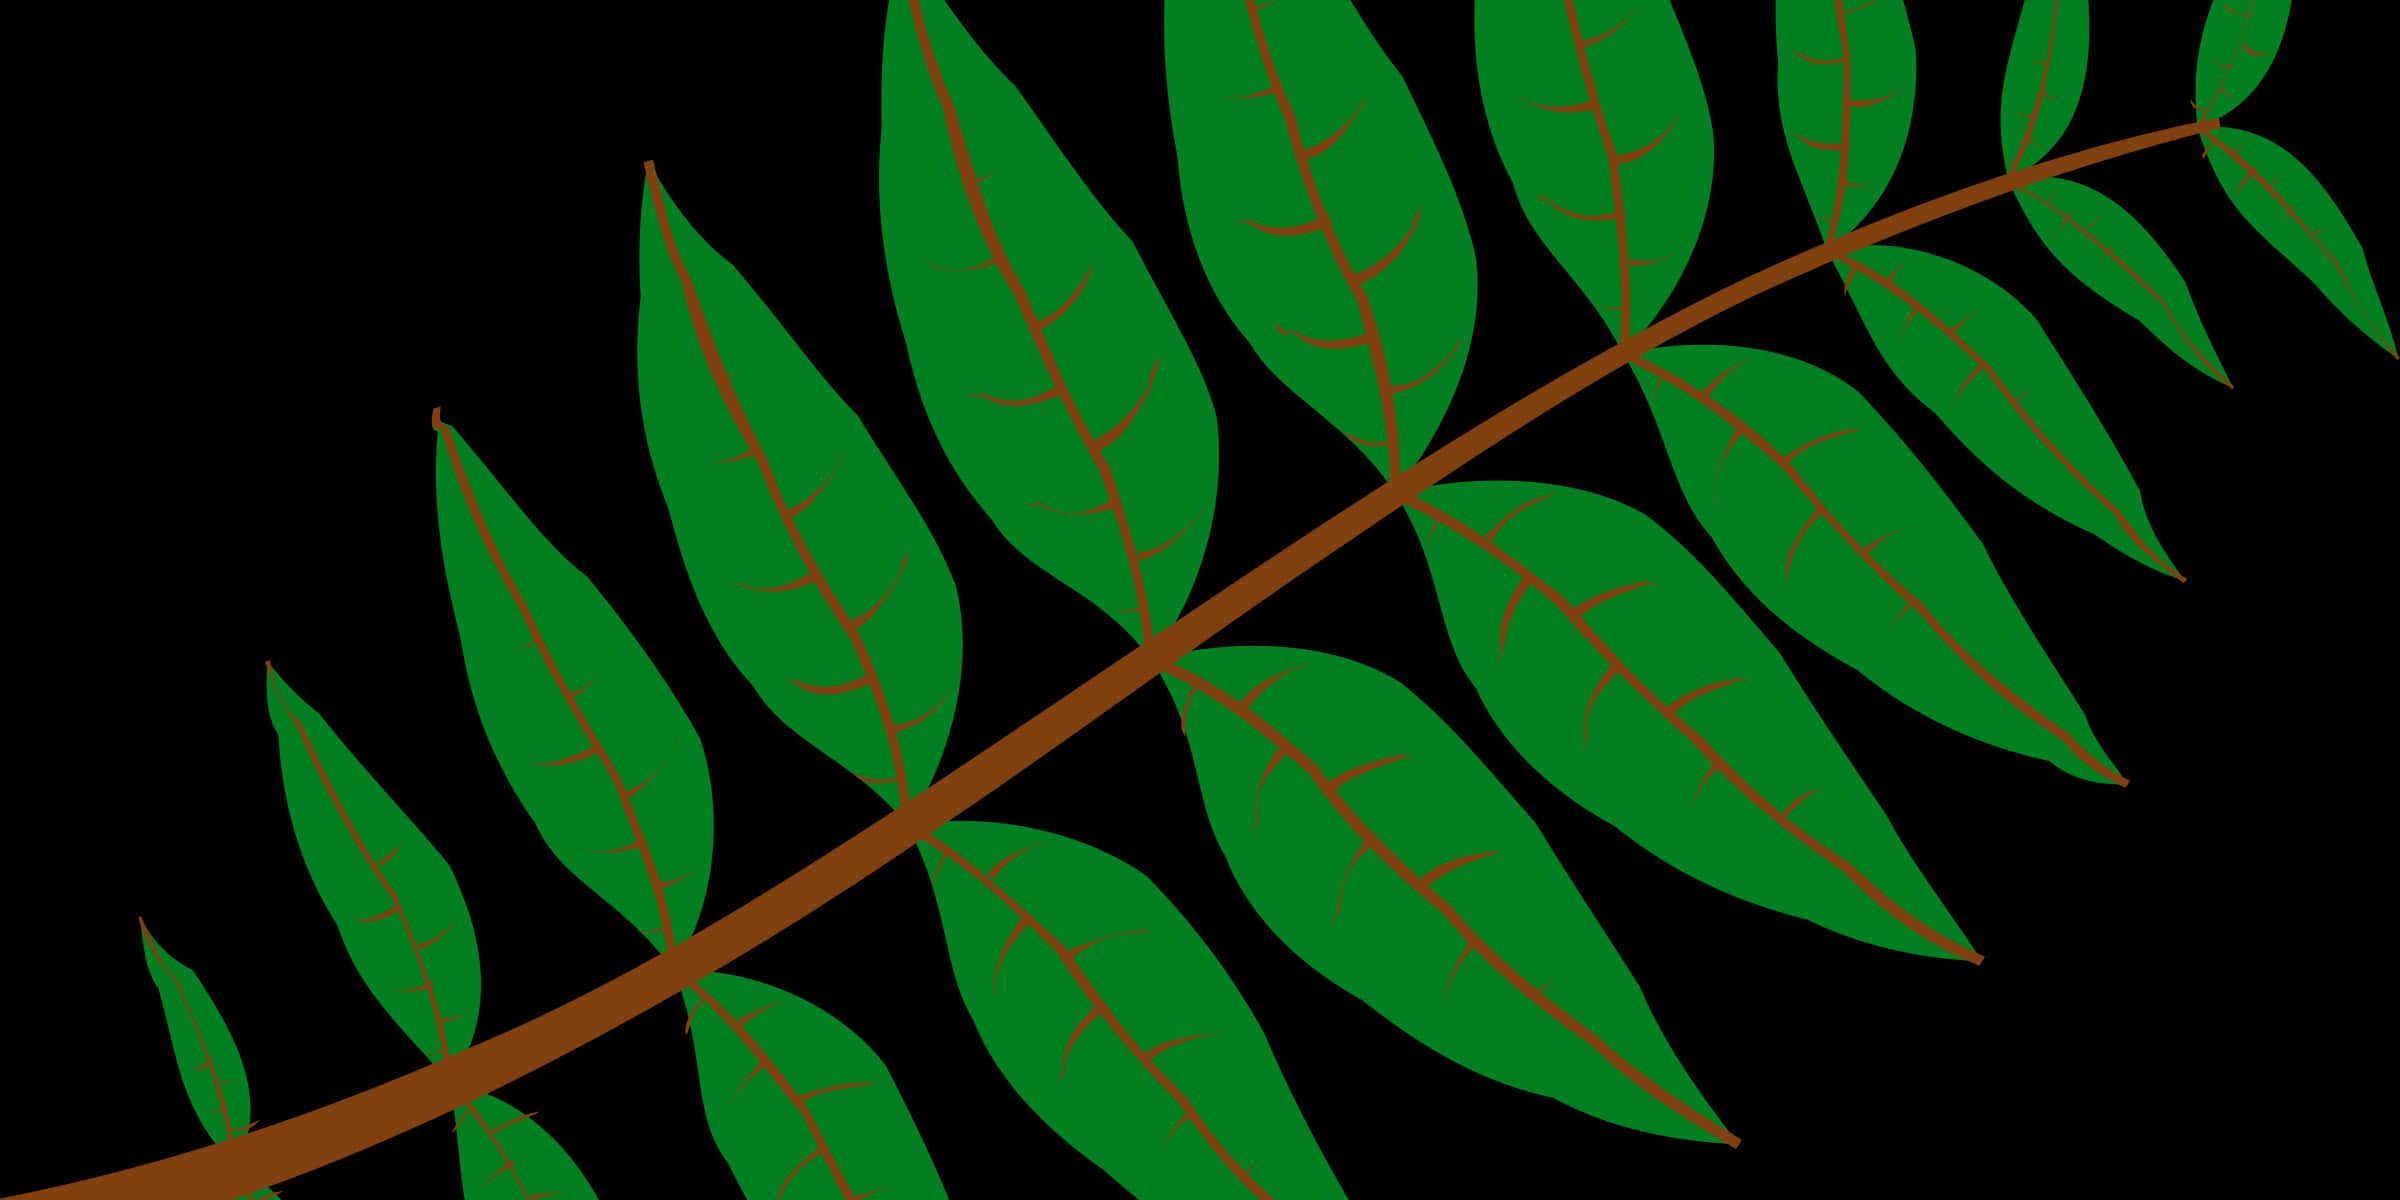 A Green Leaf With Red Lines On A Black Background